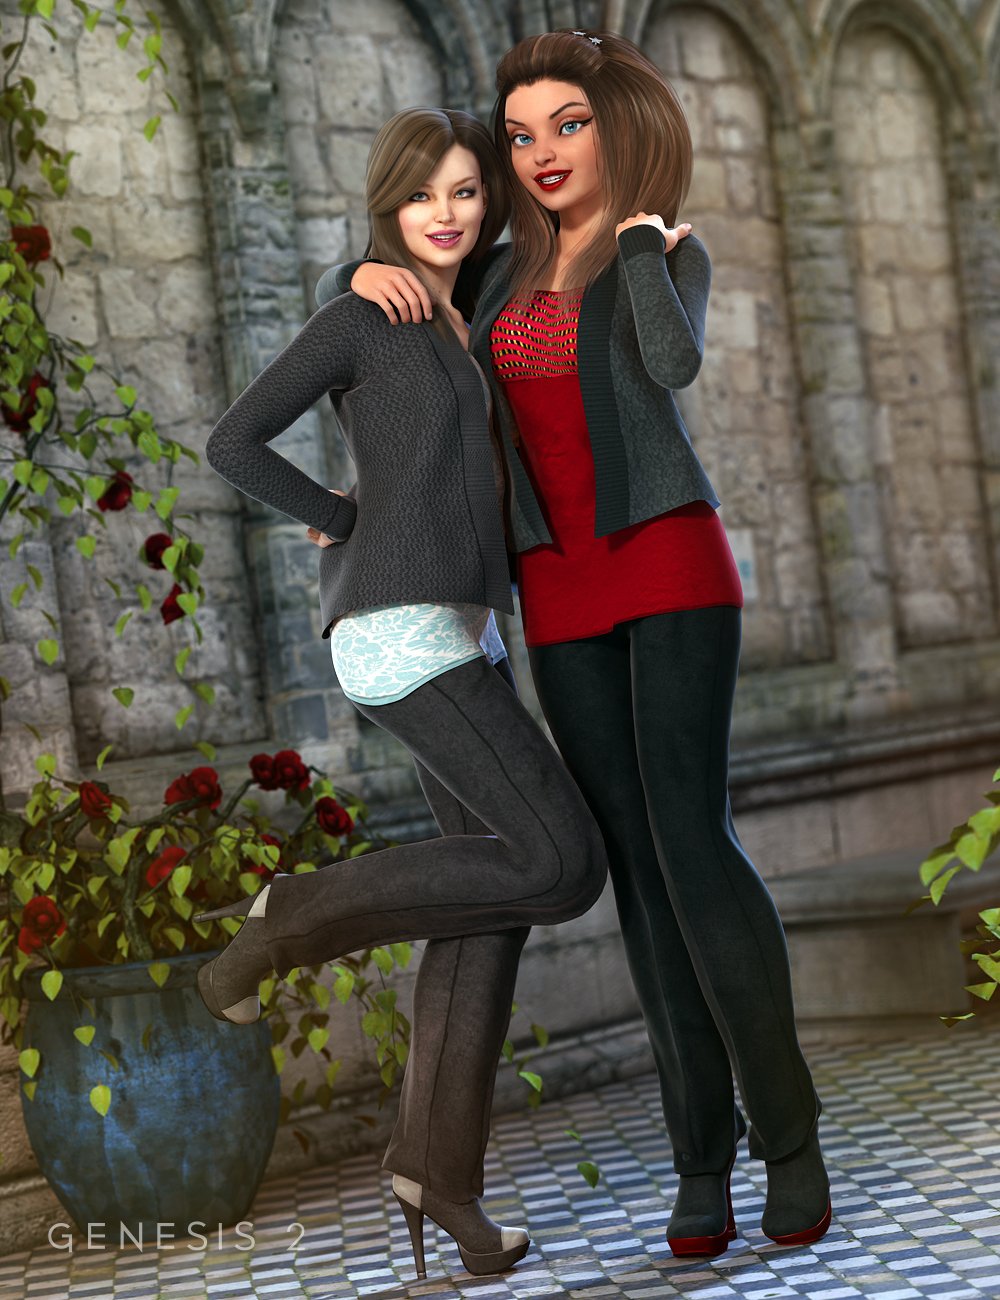 Smart and Sassy Outfit Textures by: Sarsa, 3D Models by Daz 3D